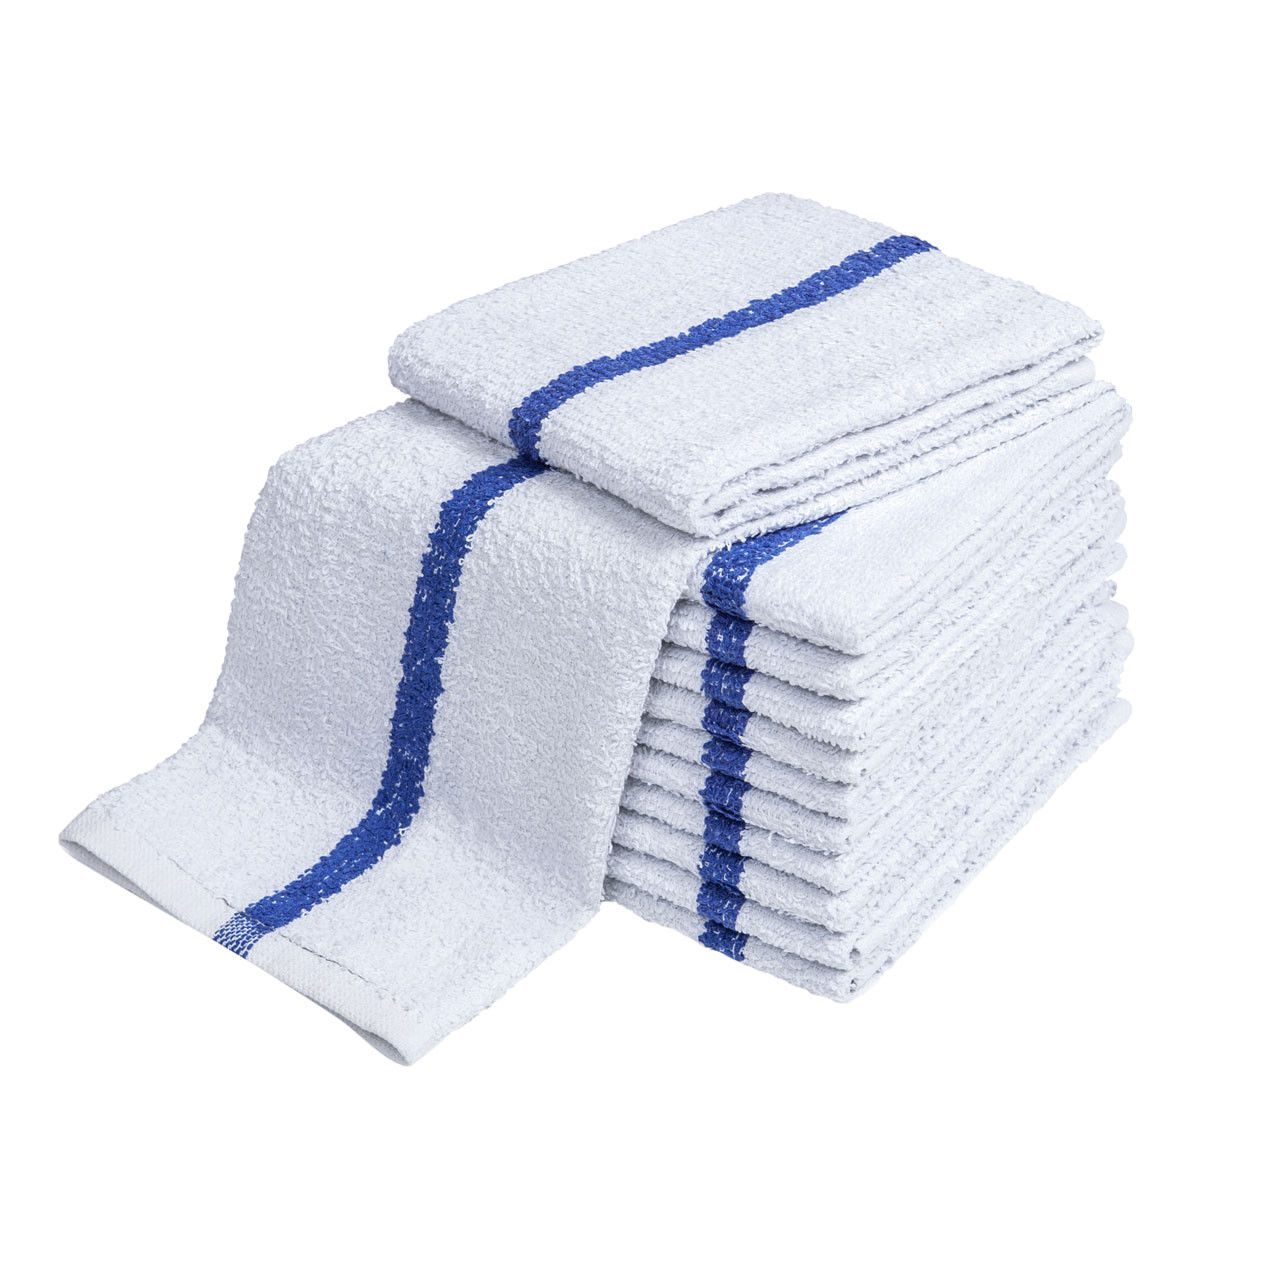 What is the process of Terry towels?